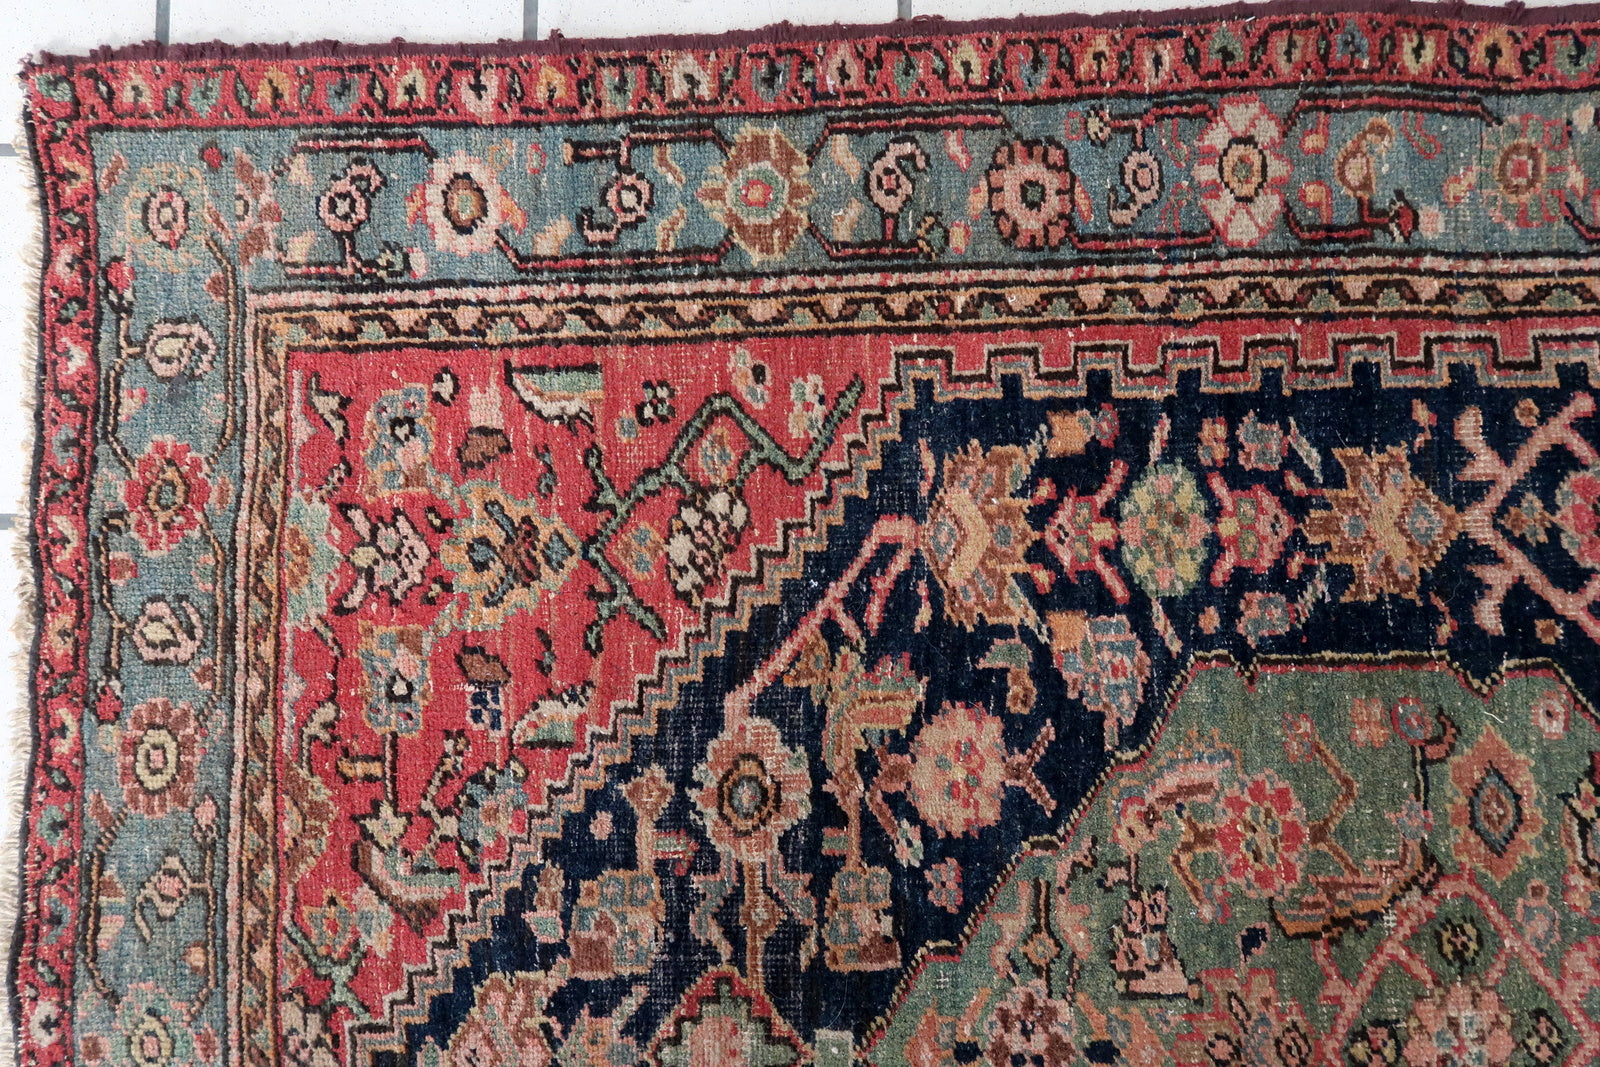 Intricate Floral Patterns on Antique Rug